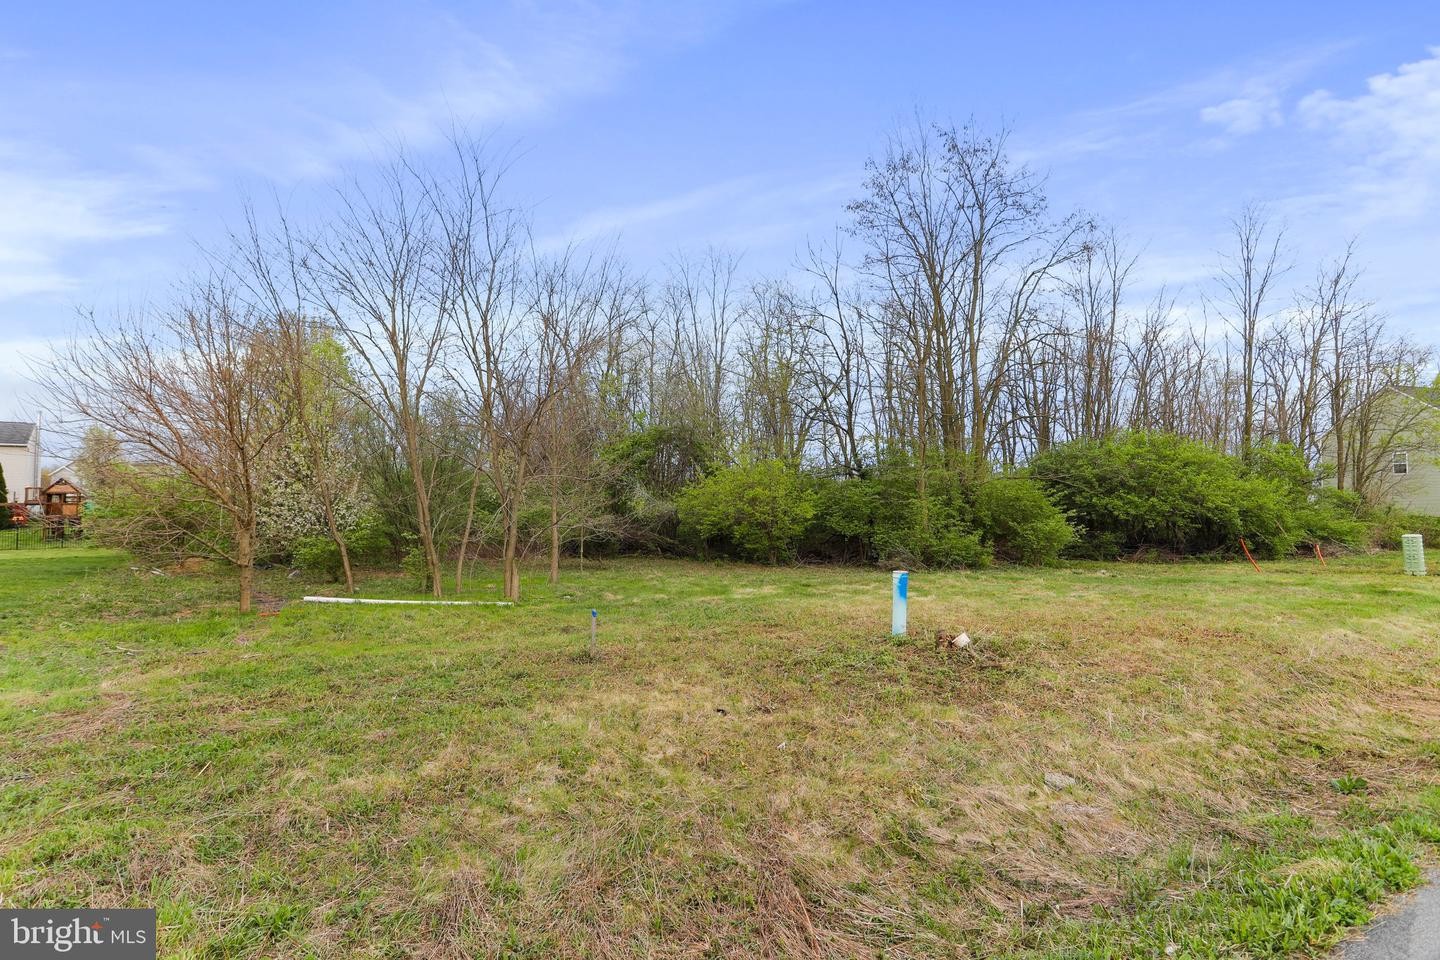 1. Lot 65 Wedgewood Dr